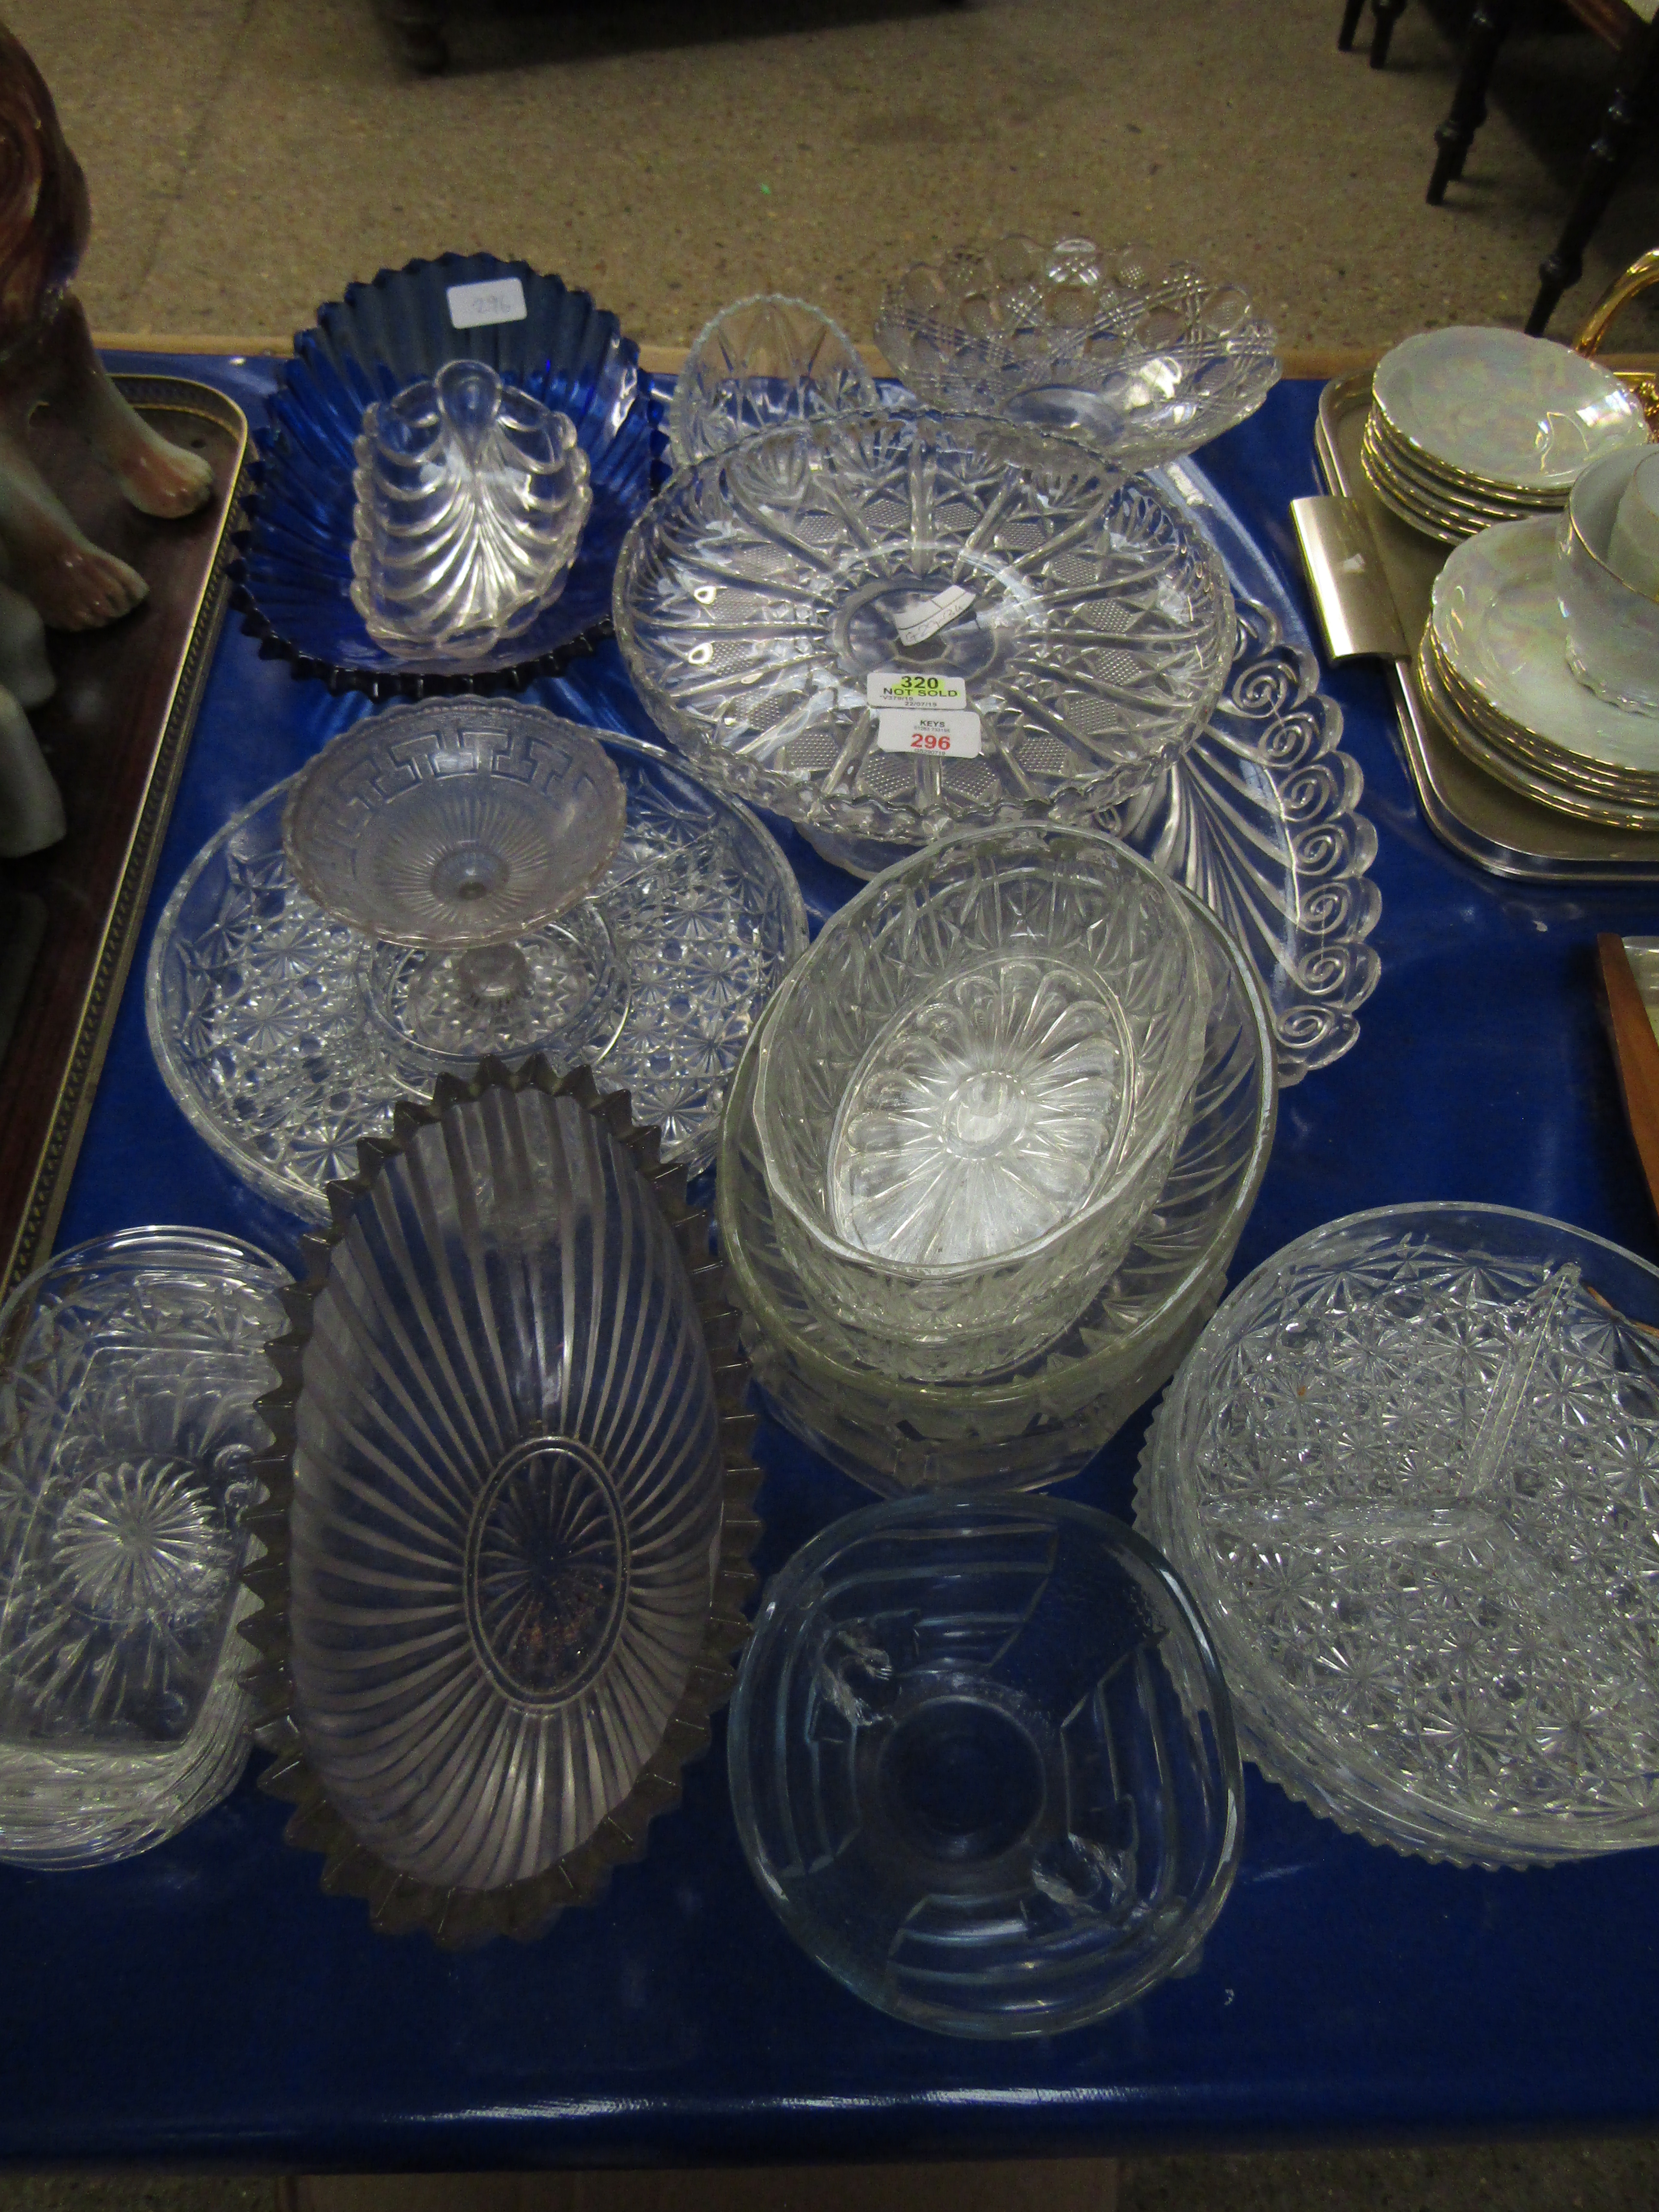 MIXED LOT OF PRESSED GLASS WARES, DISHES, CAKE STANDS, BOWLS ETC